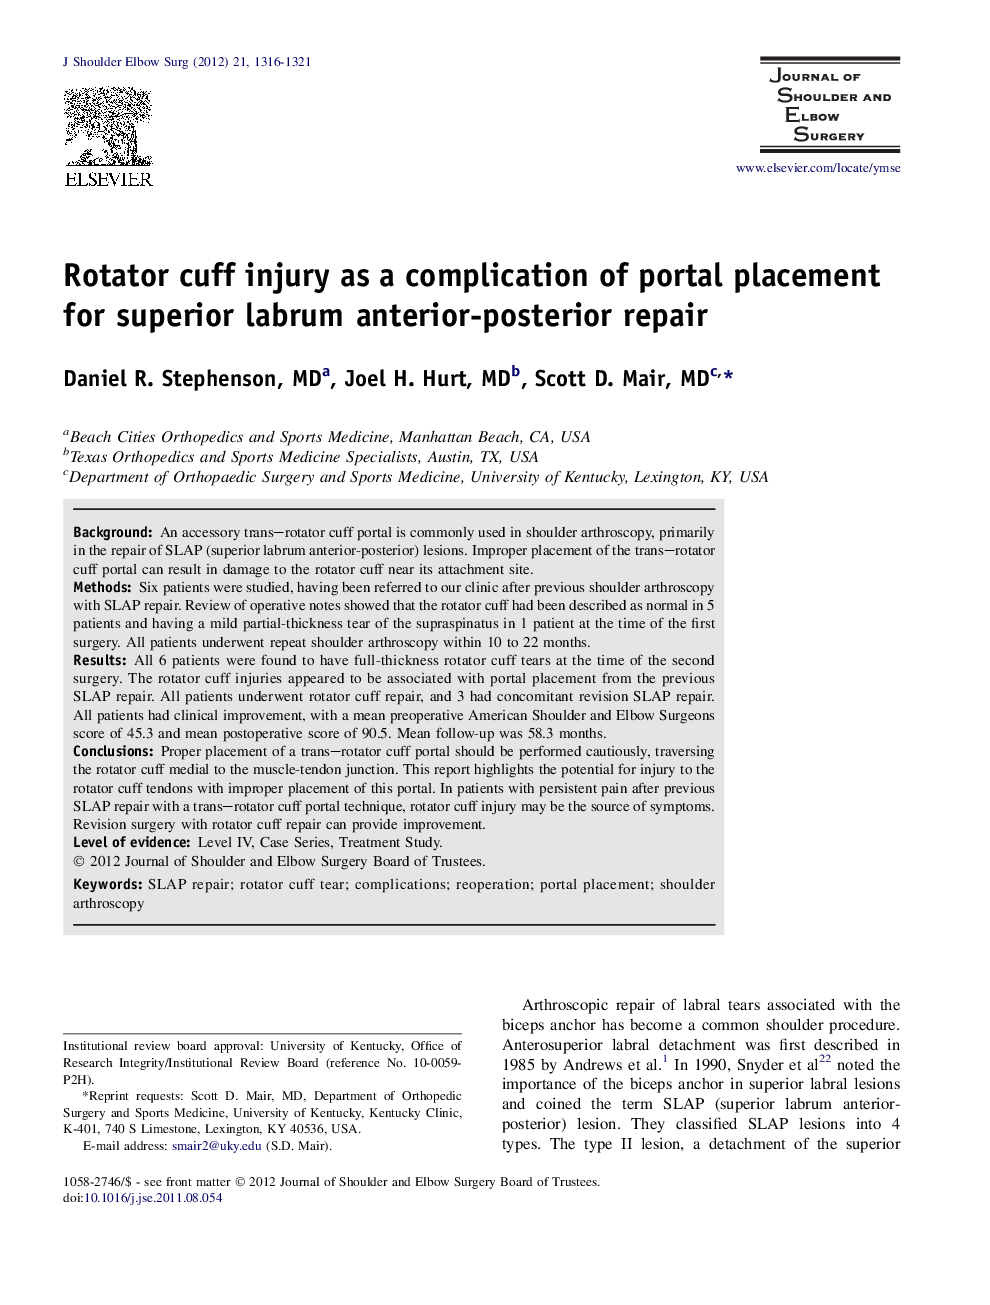 Rotator cuff injury as a complication of portal placement for superior labrum anterior-posterior repair 